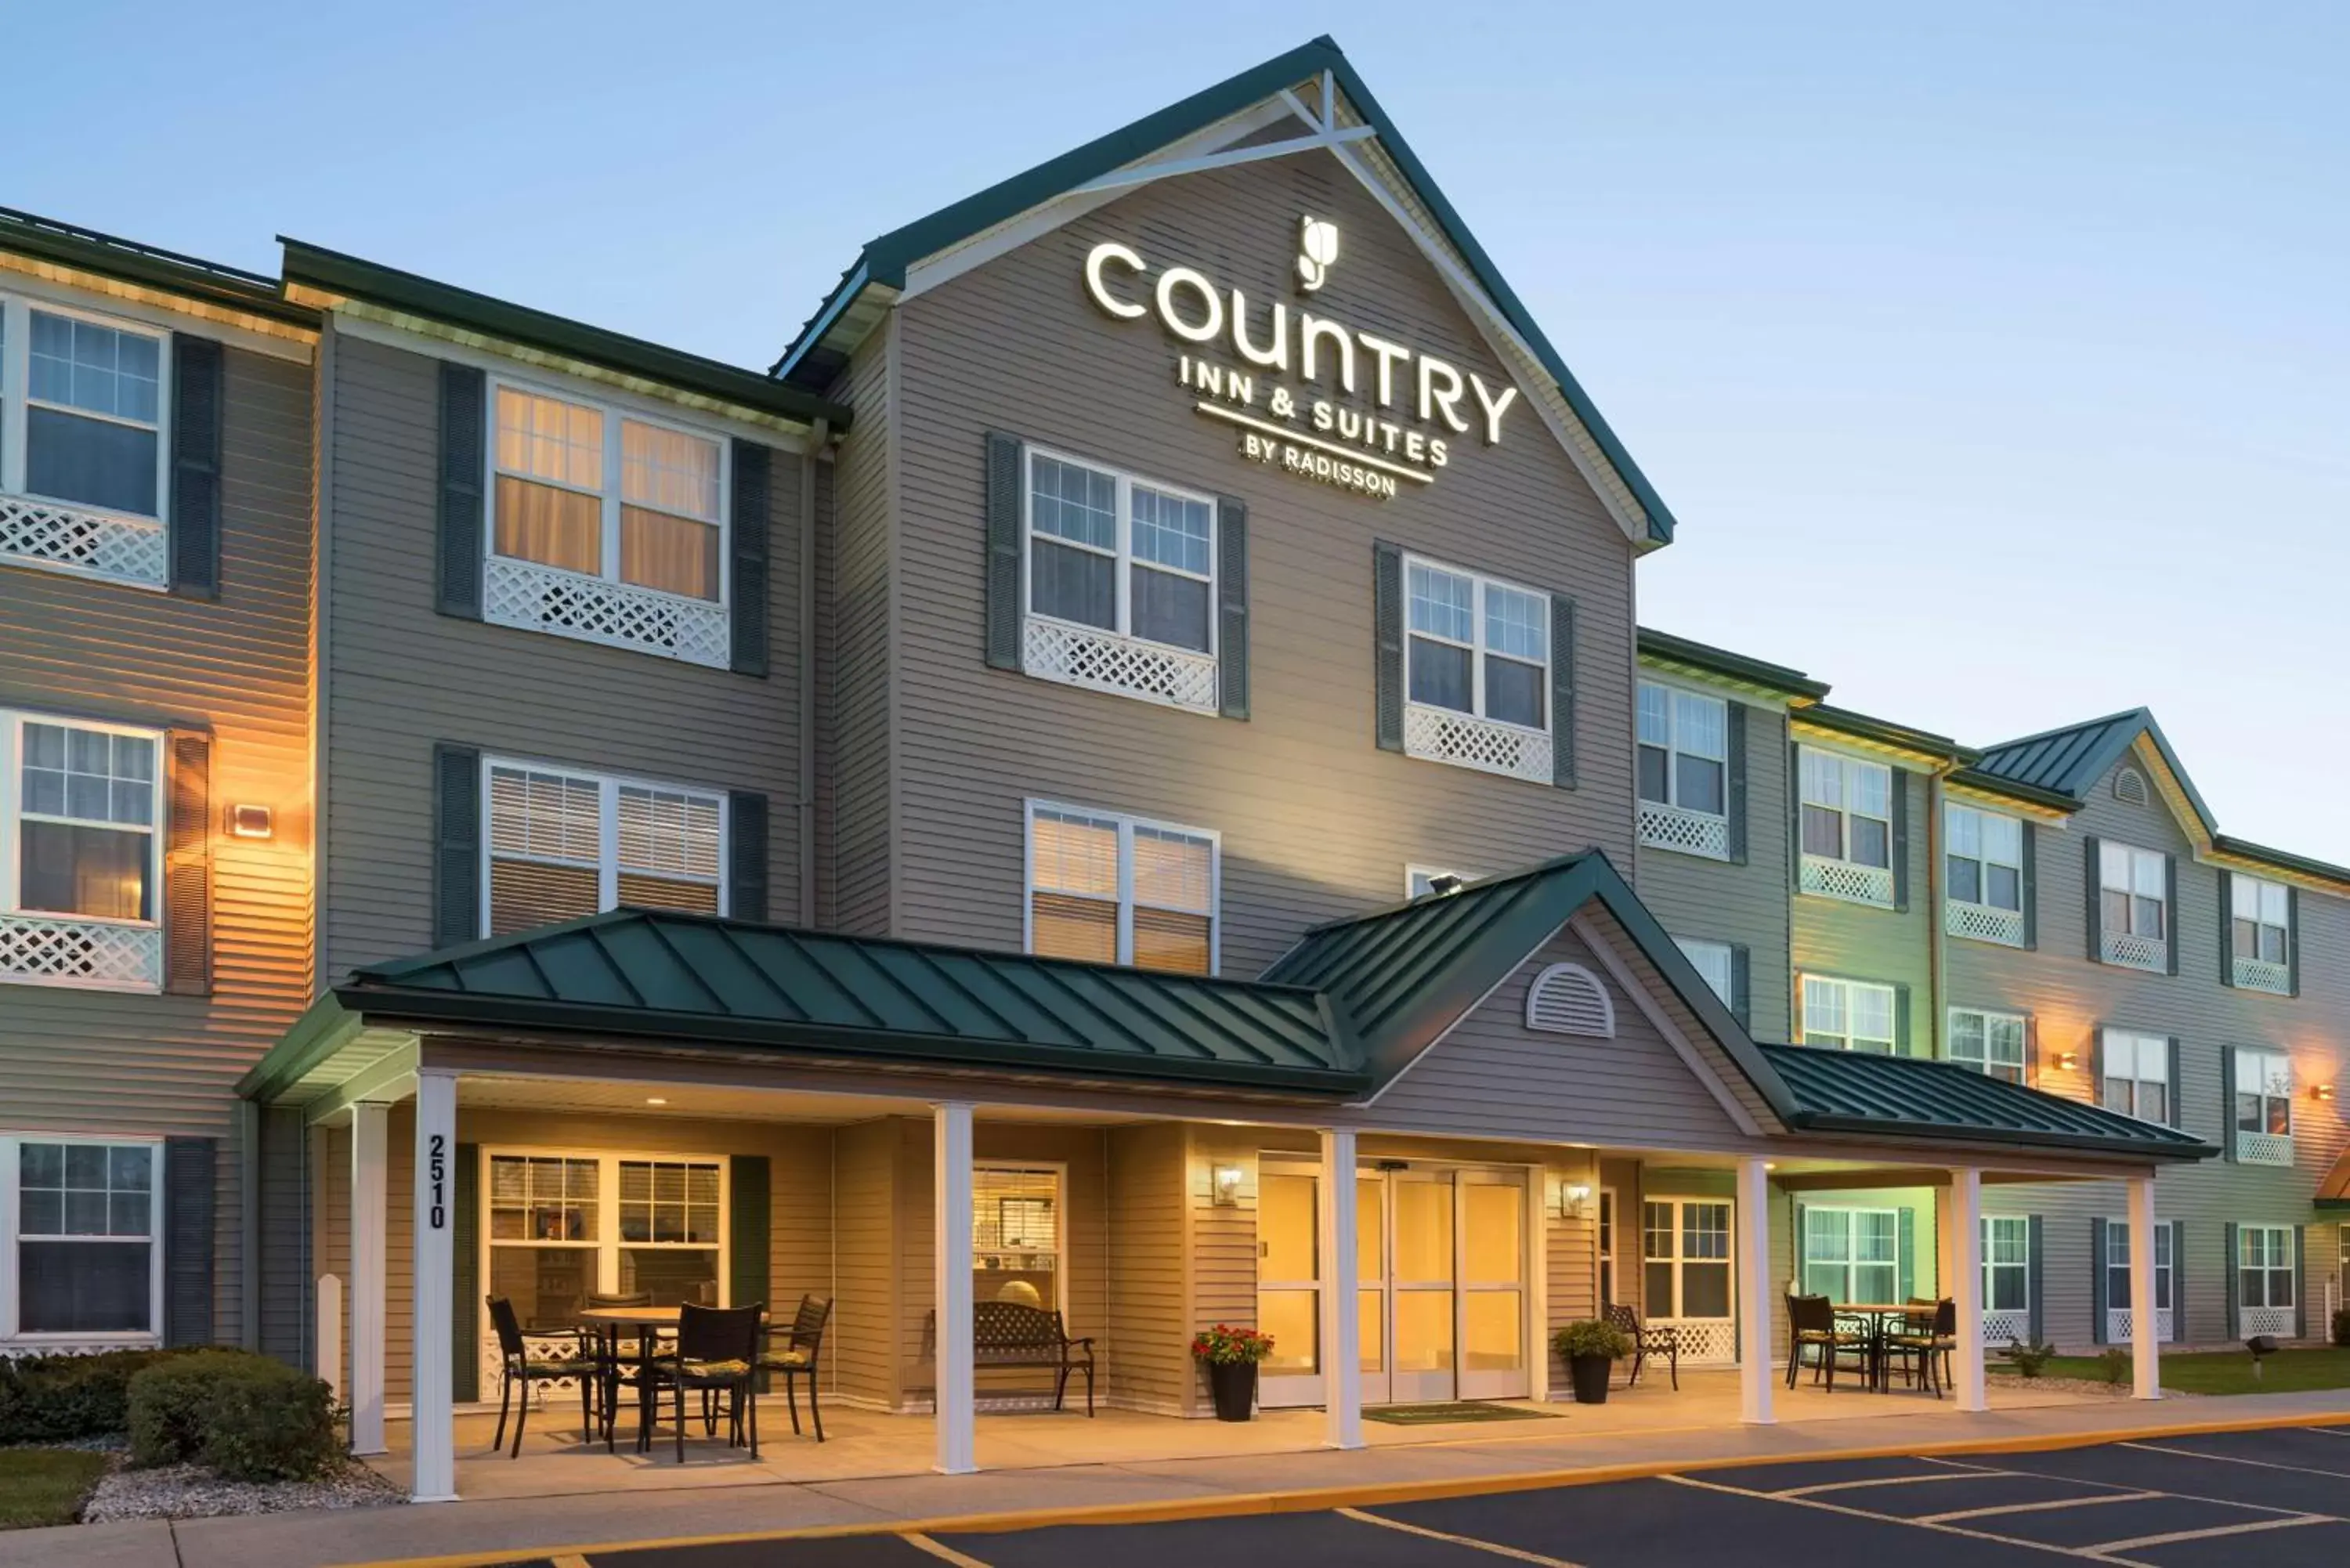 Property building in Country Inn & Suites by Radisson, Ankeny, IA